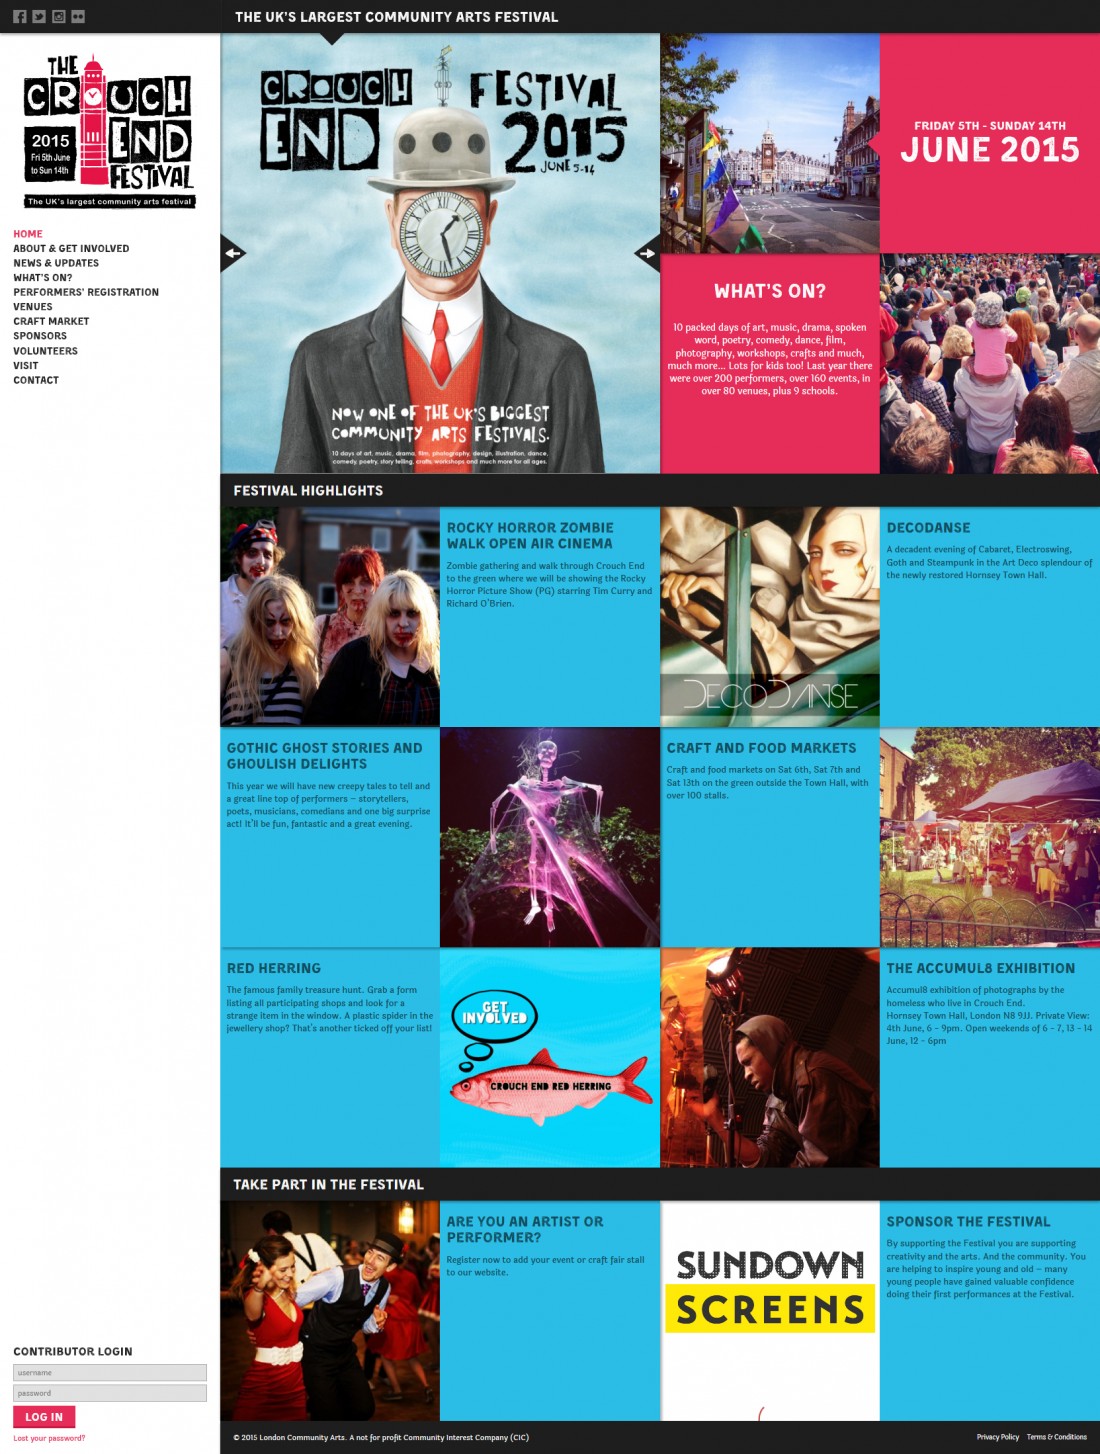 Crouch End Festival website home page